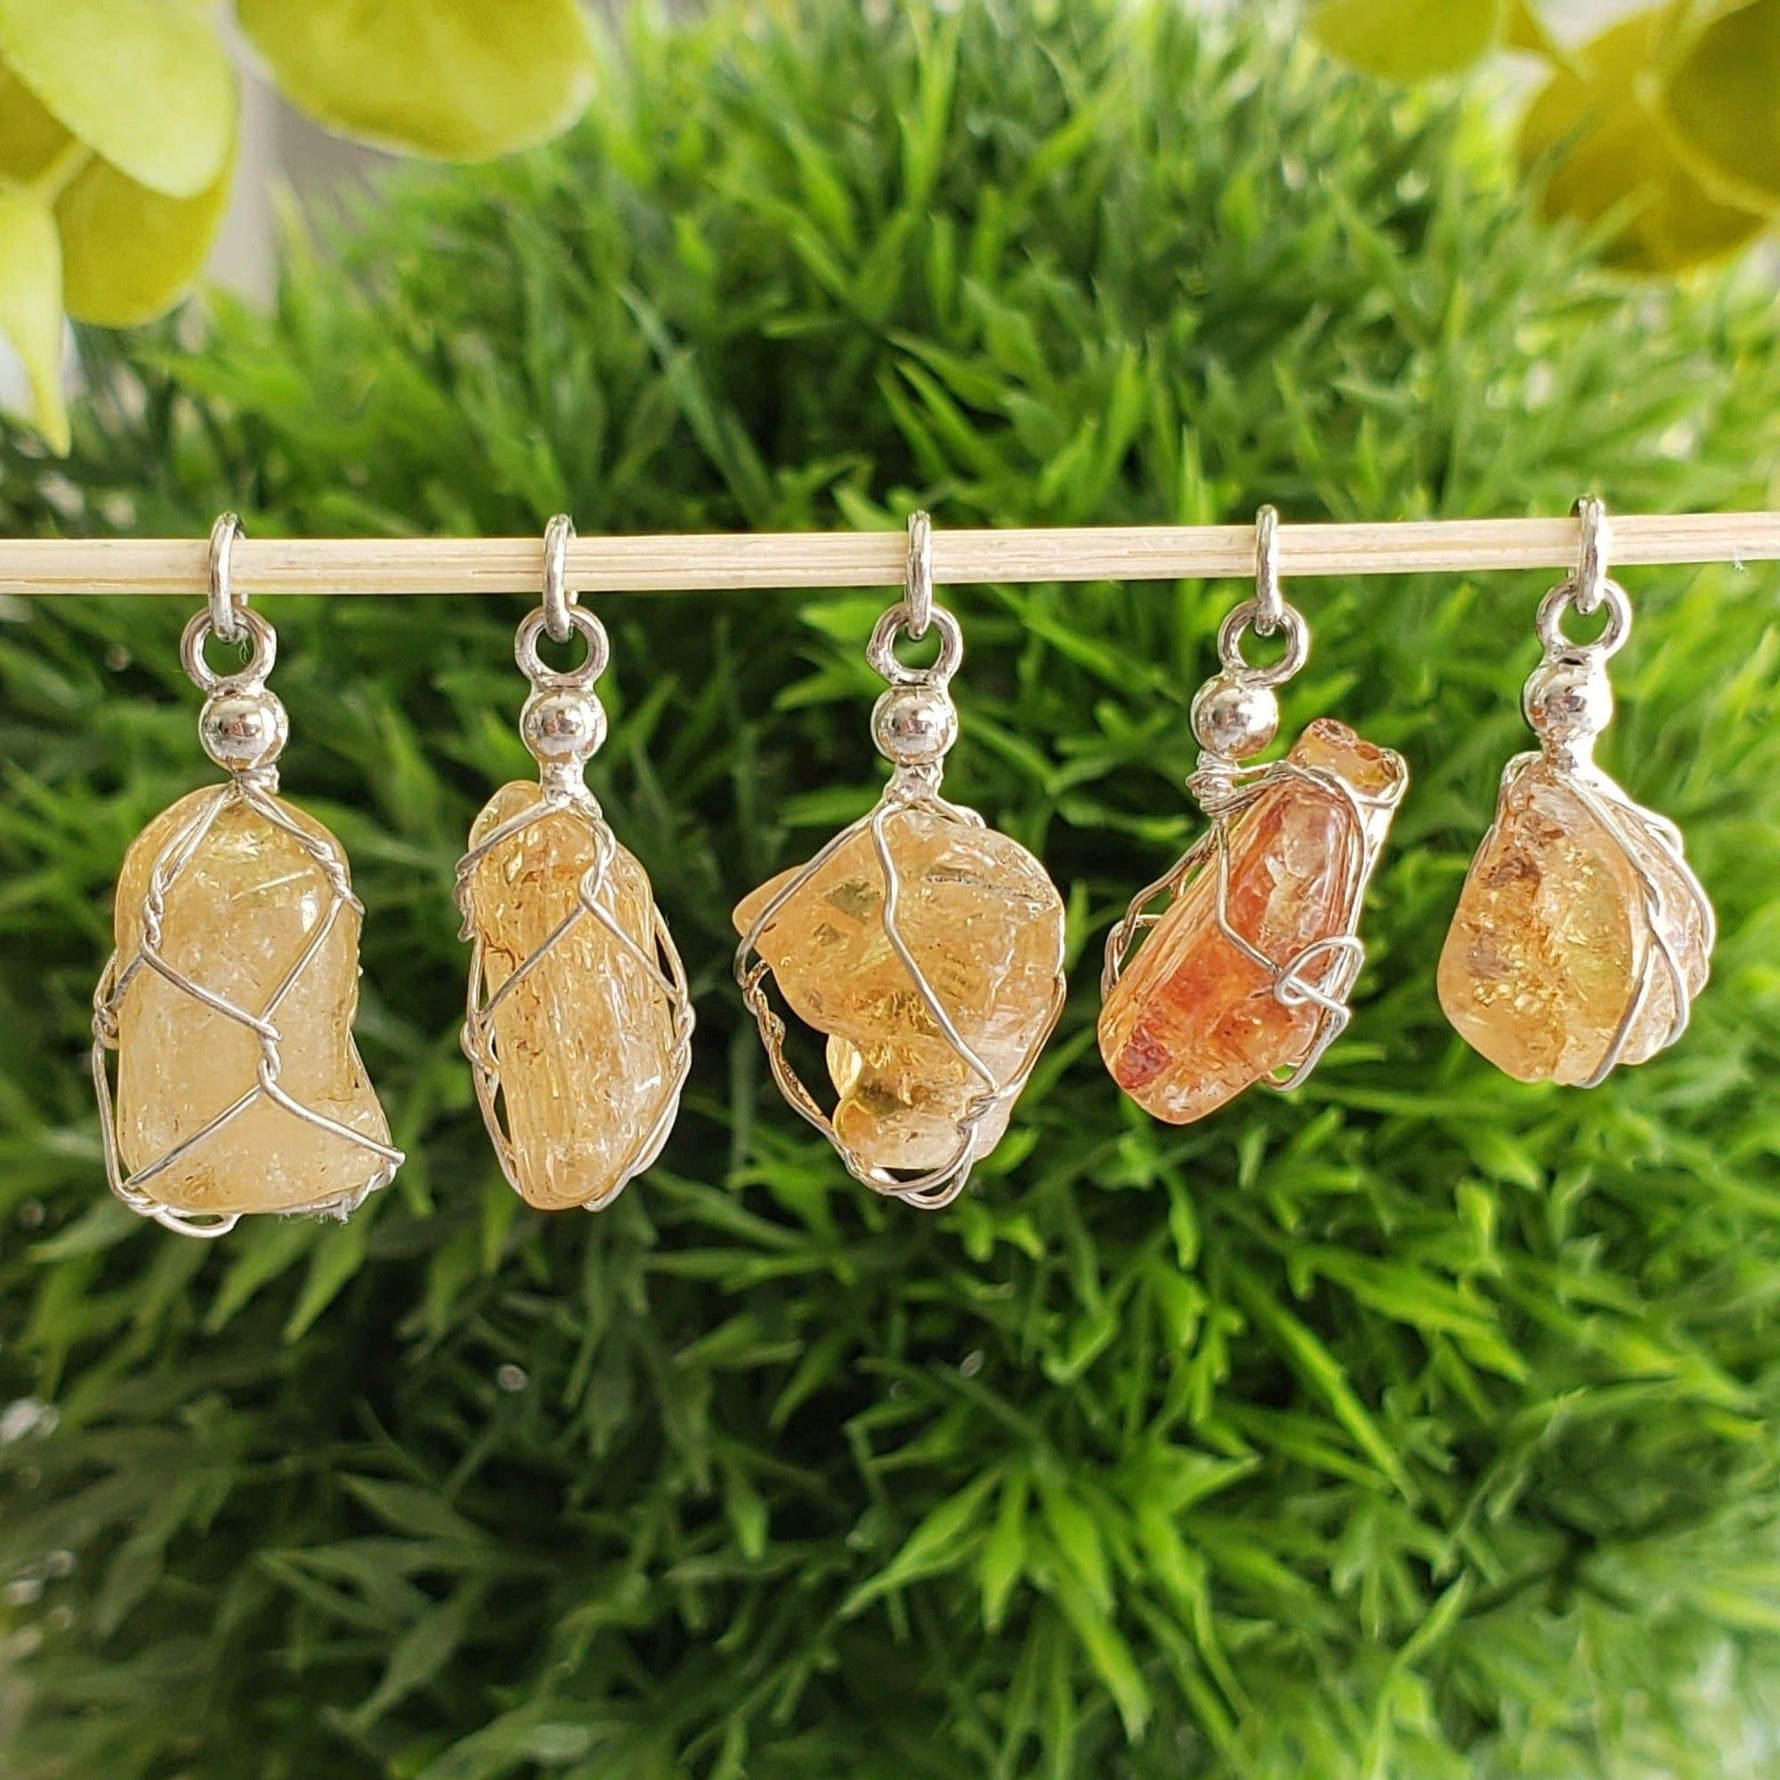 Imperial Topaz Pendant | 925 Silver Wire Wrapped Pendant | Natural Raw Topaz